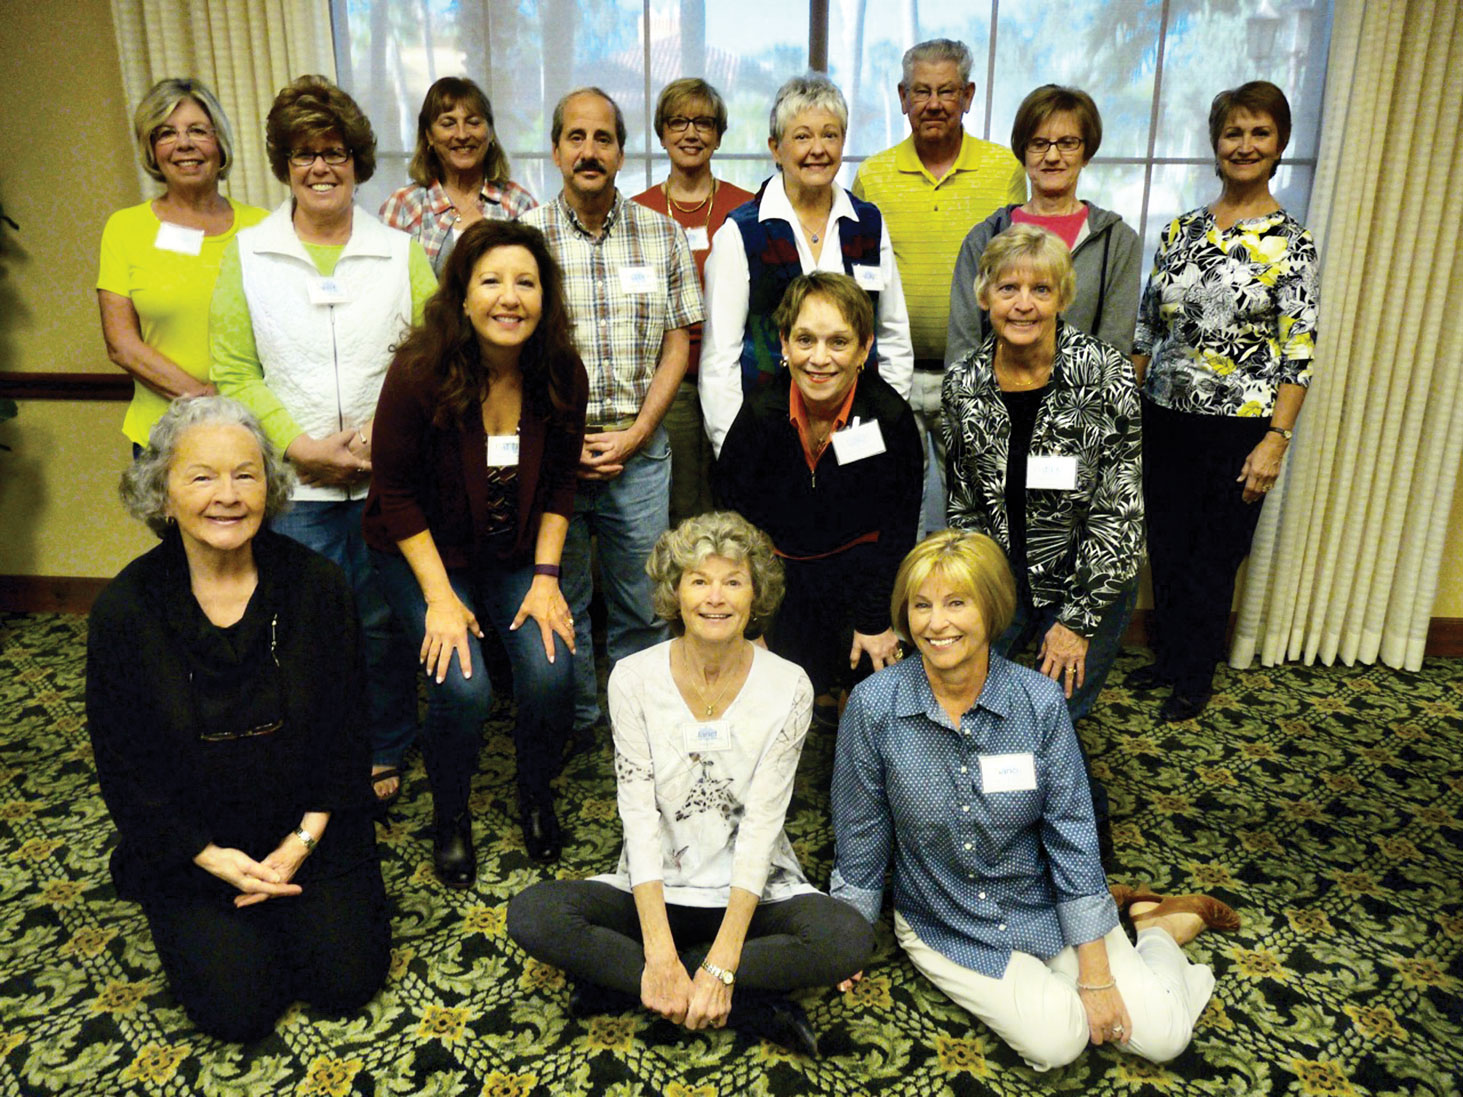 Back row: Joyce Roemersberger, Maria Murray, Linda Erkkila, Tom Roemersberger and Esther West; row 3: Susie Unklesbay, Sheldon Tencer, Jackie Havranek and Connie Snyder; row 2: Patti Hedgspeth, Leslie Lowery and Thelma Svoboda; front row: Instructors: Johanna Kaufman, Janet Day and Nancy Hume. Not pictured is Janis Korba, instructor.